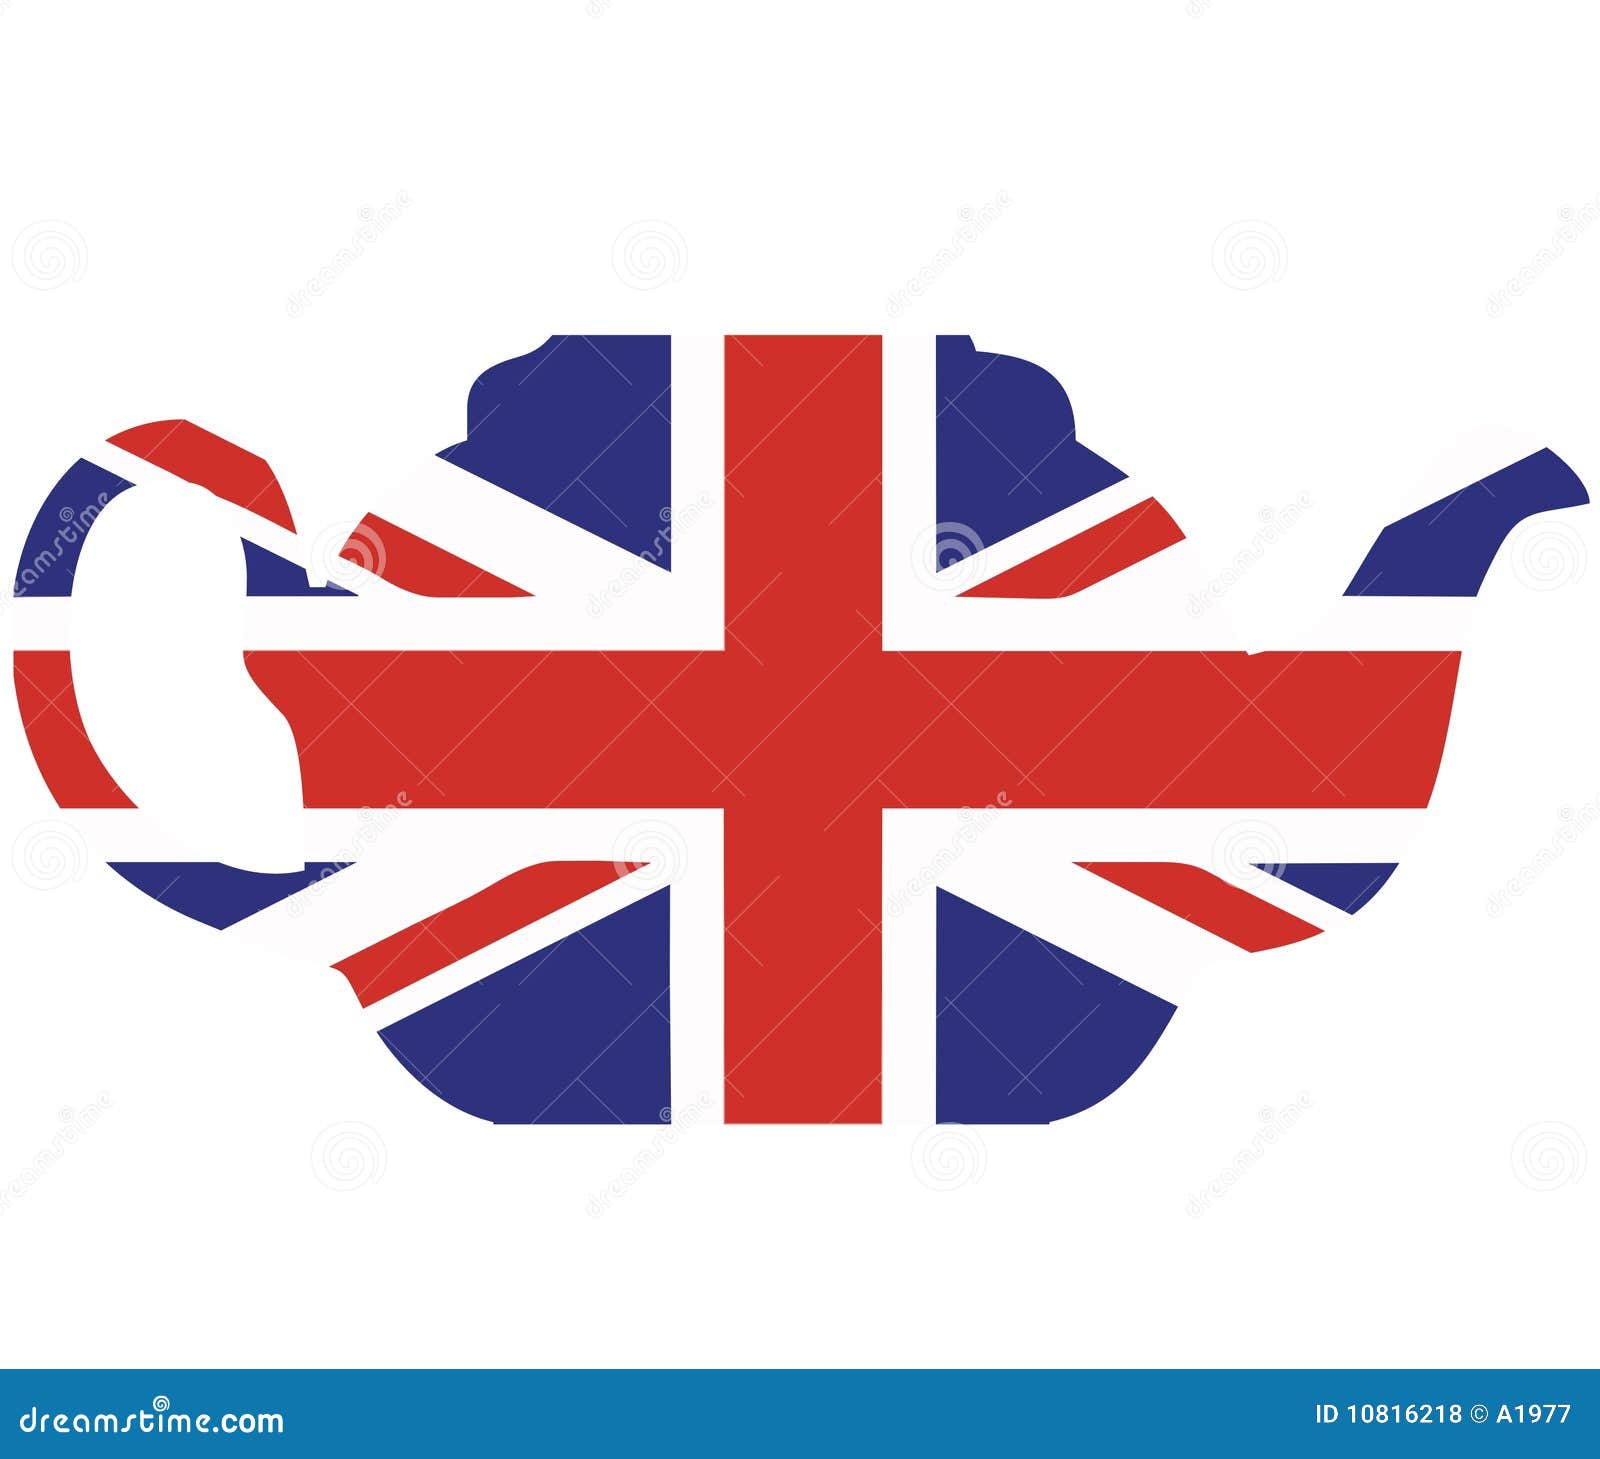 british clipart collection - photo #21